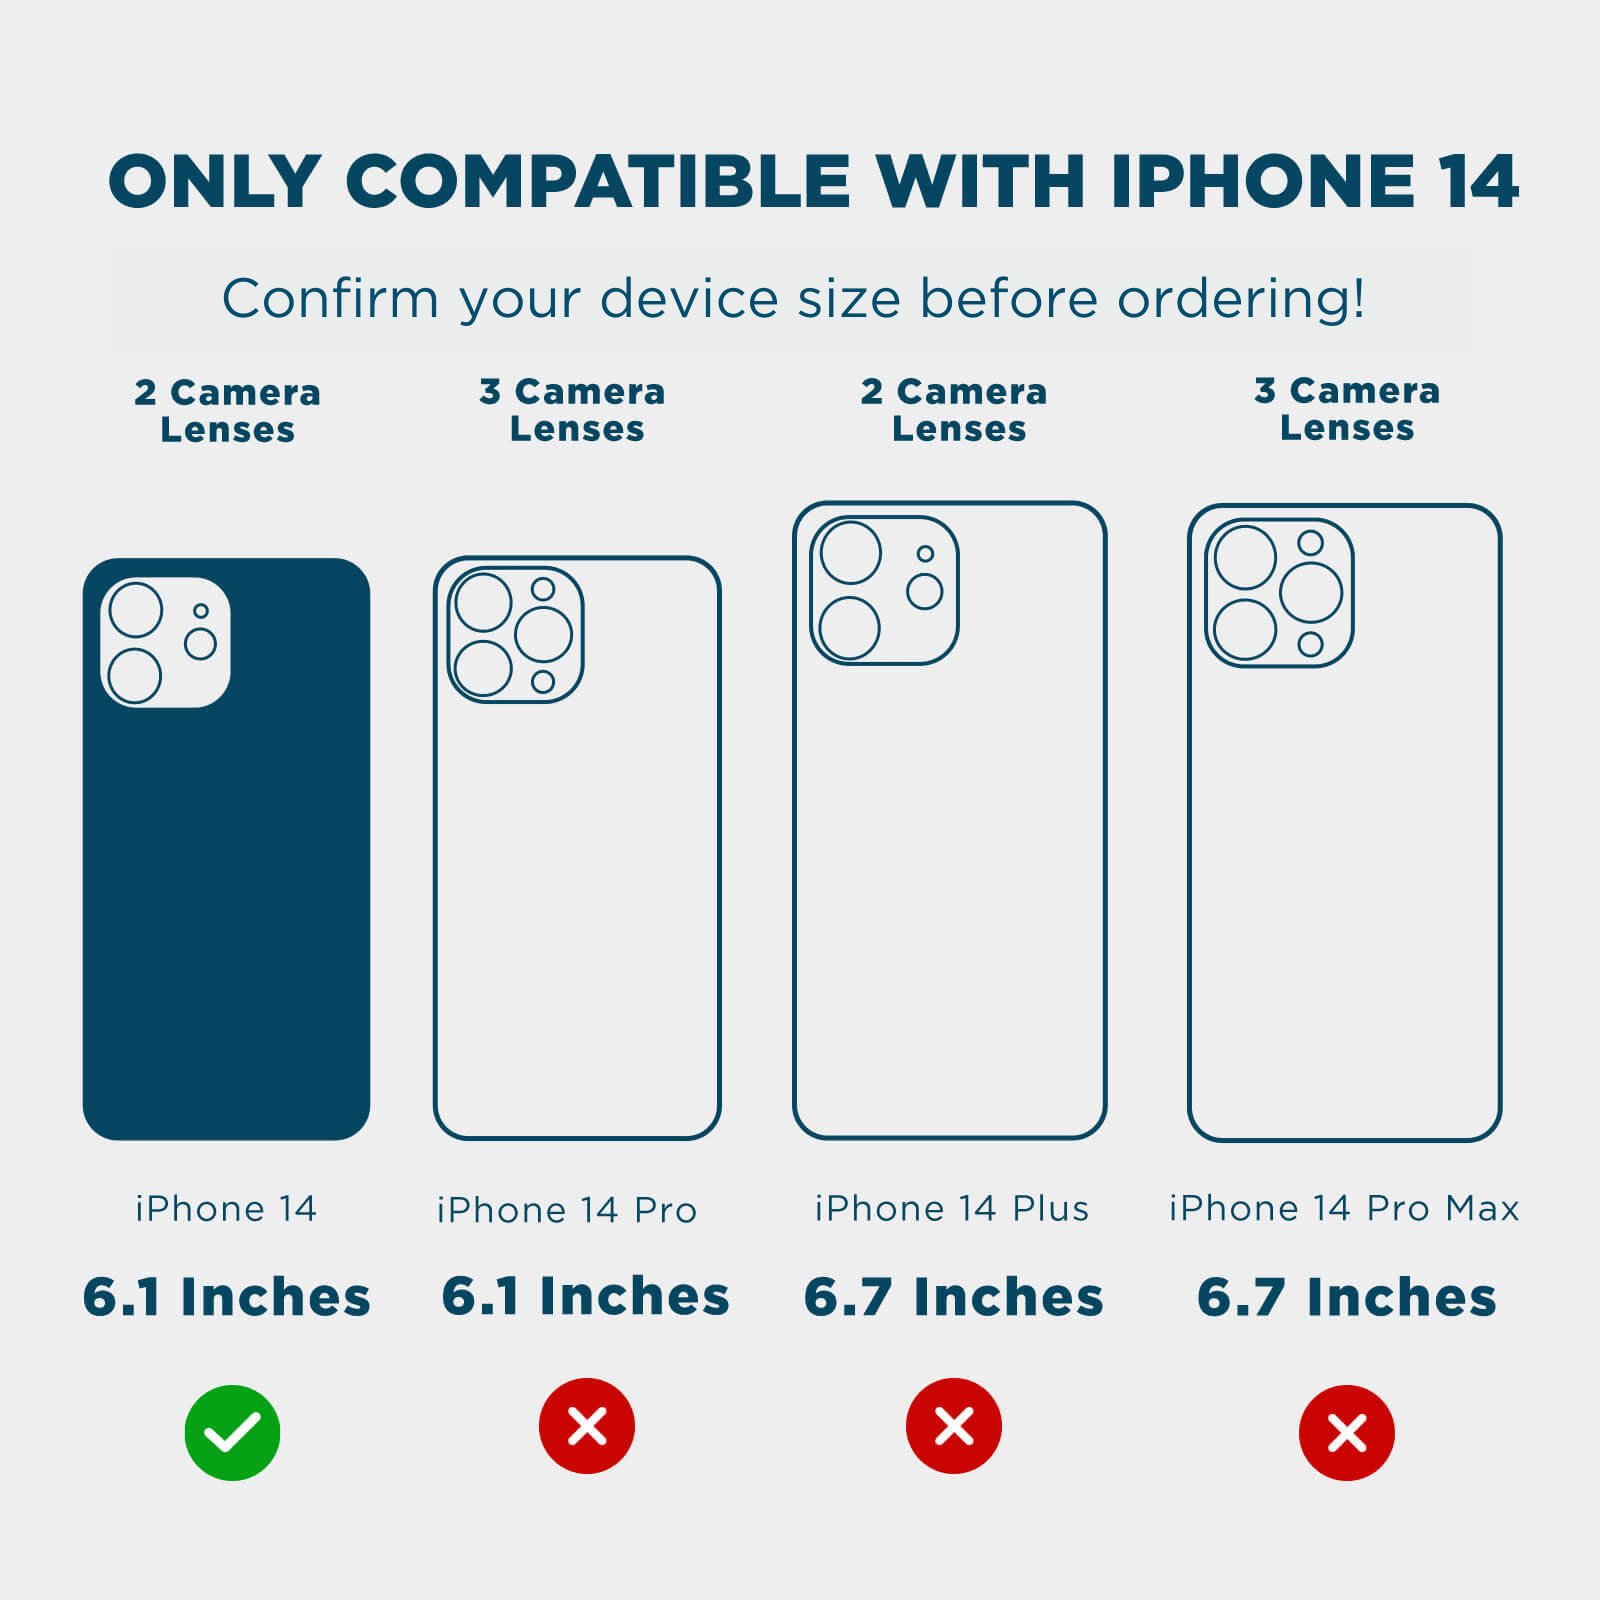 ONLY COMPATIBLE WITH IPHONE 14 CONFIRM YOUR DEVICE SIZE BEFORE ORDERING! 2 CAMERA LENSES, 3 CAMERA LENSES, 2 CAMERA LENSES, 3 CAMERA LENSES. IPHONE 14 6.1" IPHONE 14 PRO 6.1" IPHONE 14 PLUS 6.7" IPHONE 14 PRO MAX 6.7". COLOR::PURPLE